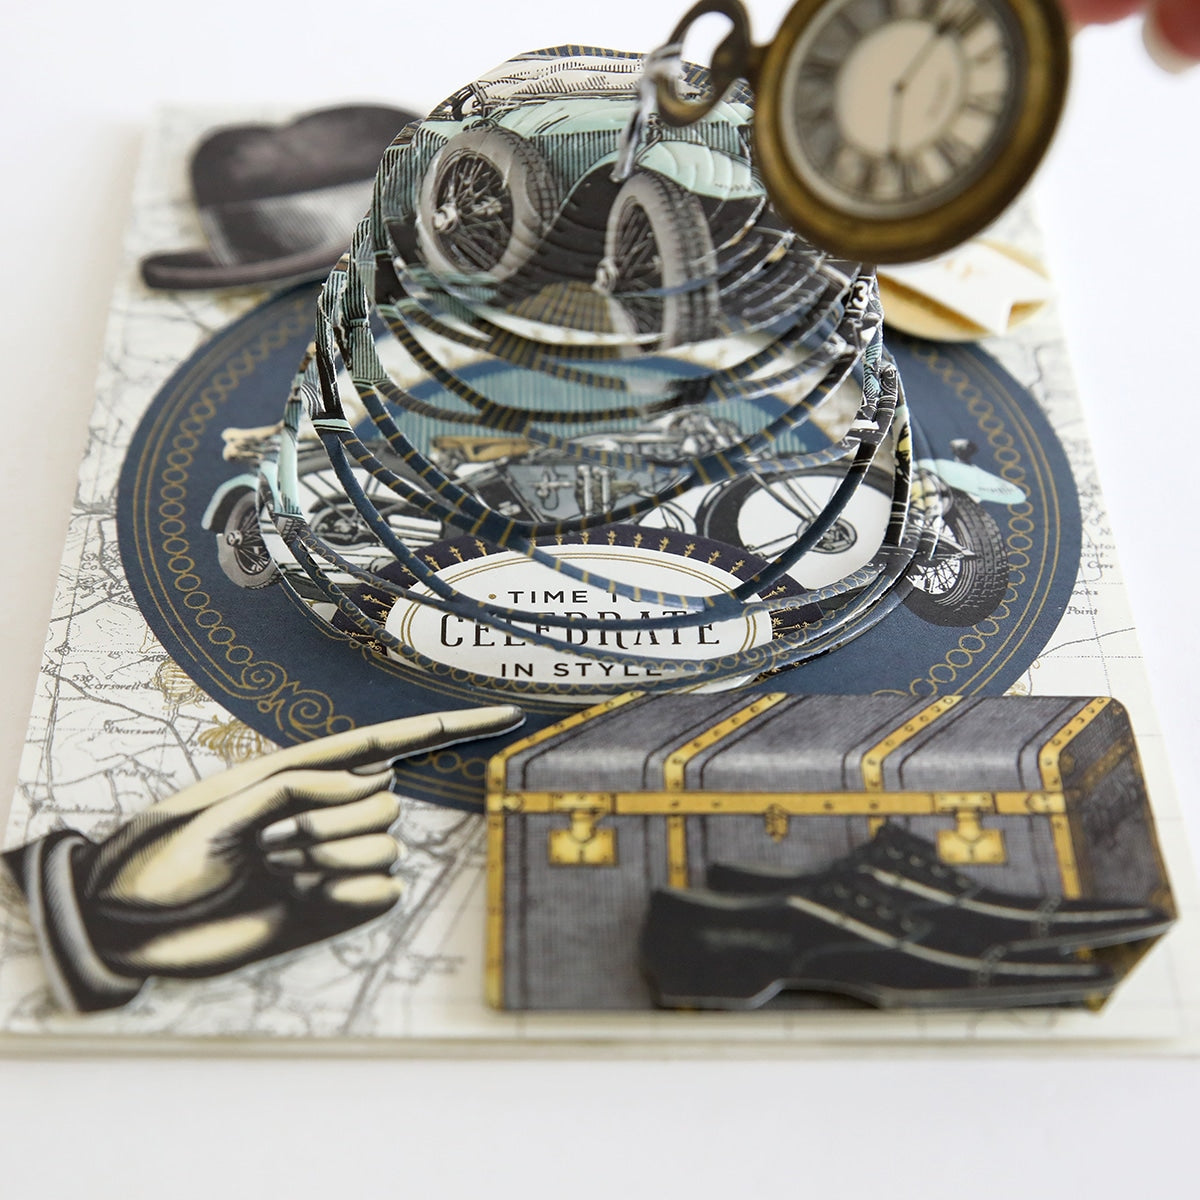 A piece of Handsome Kirigami Scenes and Embellishments with a clock and a hand.